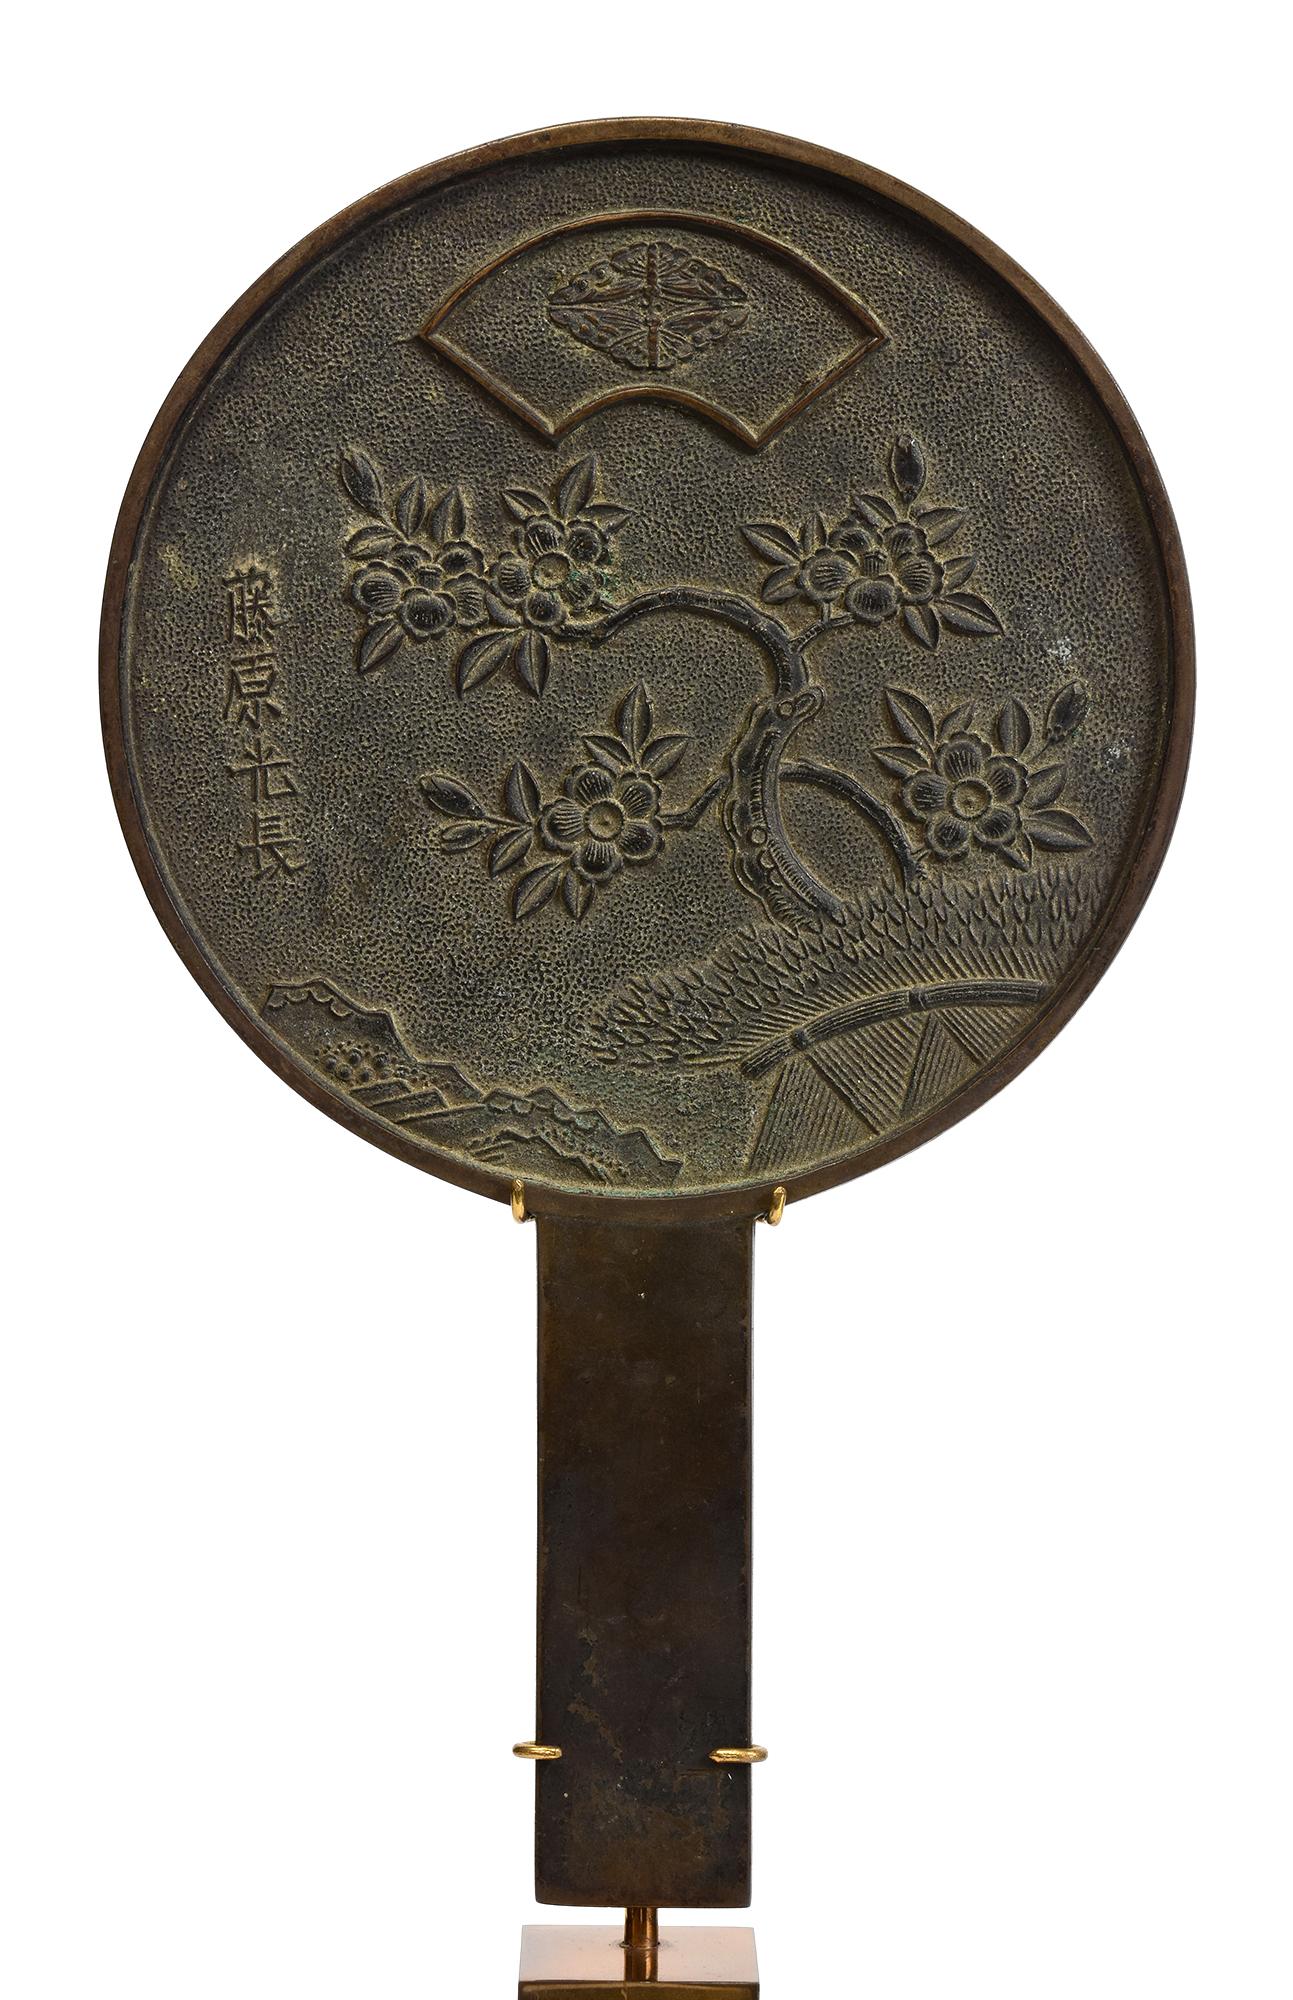 Japanese bronze mirror with stand.

Age: Japan, Showa Period, Early 20th Century
Size: Diameter 15 C.M. / Height 24.5 C.M.
Size including stand: Height 40 C.M.
Condition: Nice condition overall.